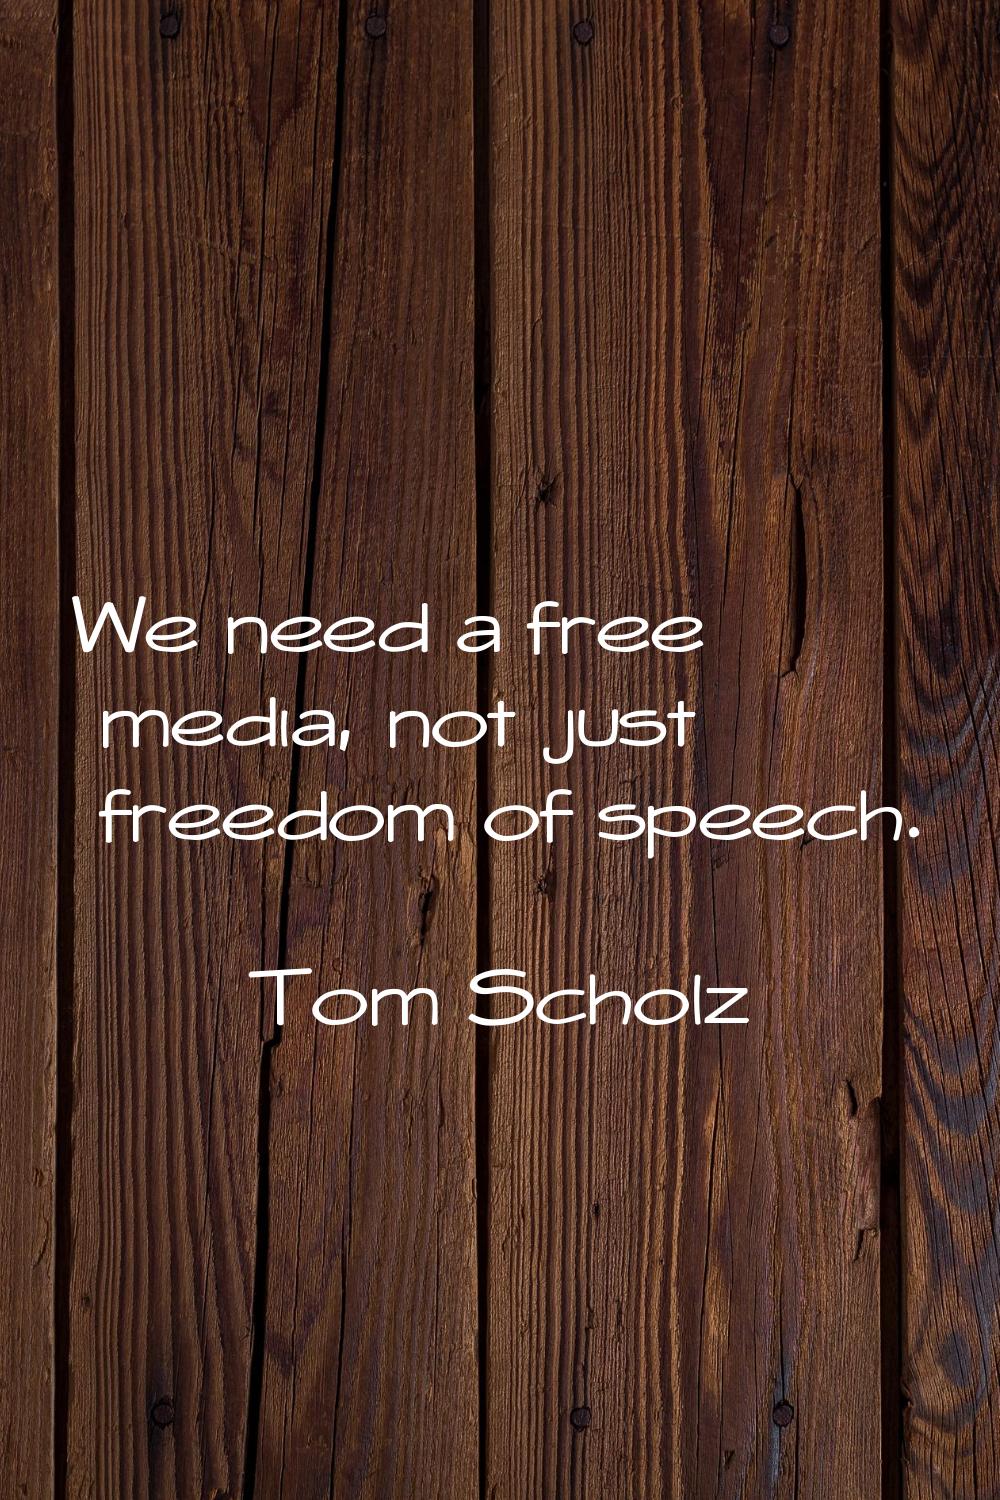 We need a free media, not just freedom of speech.